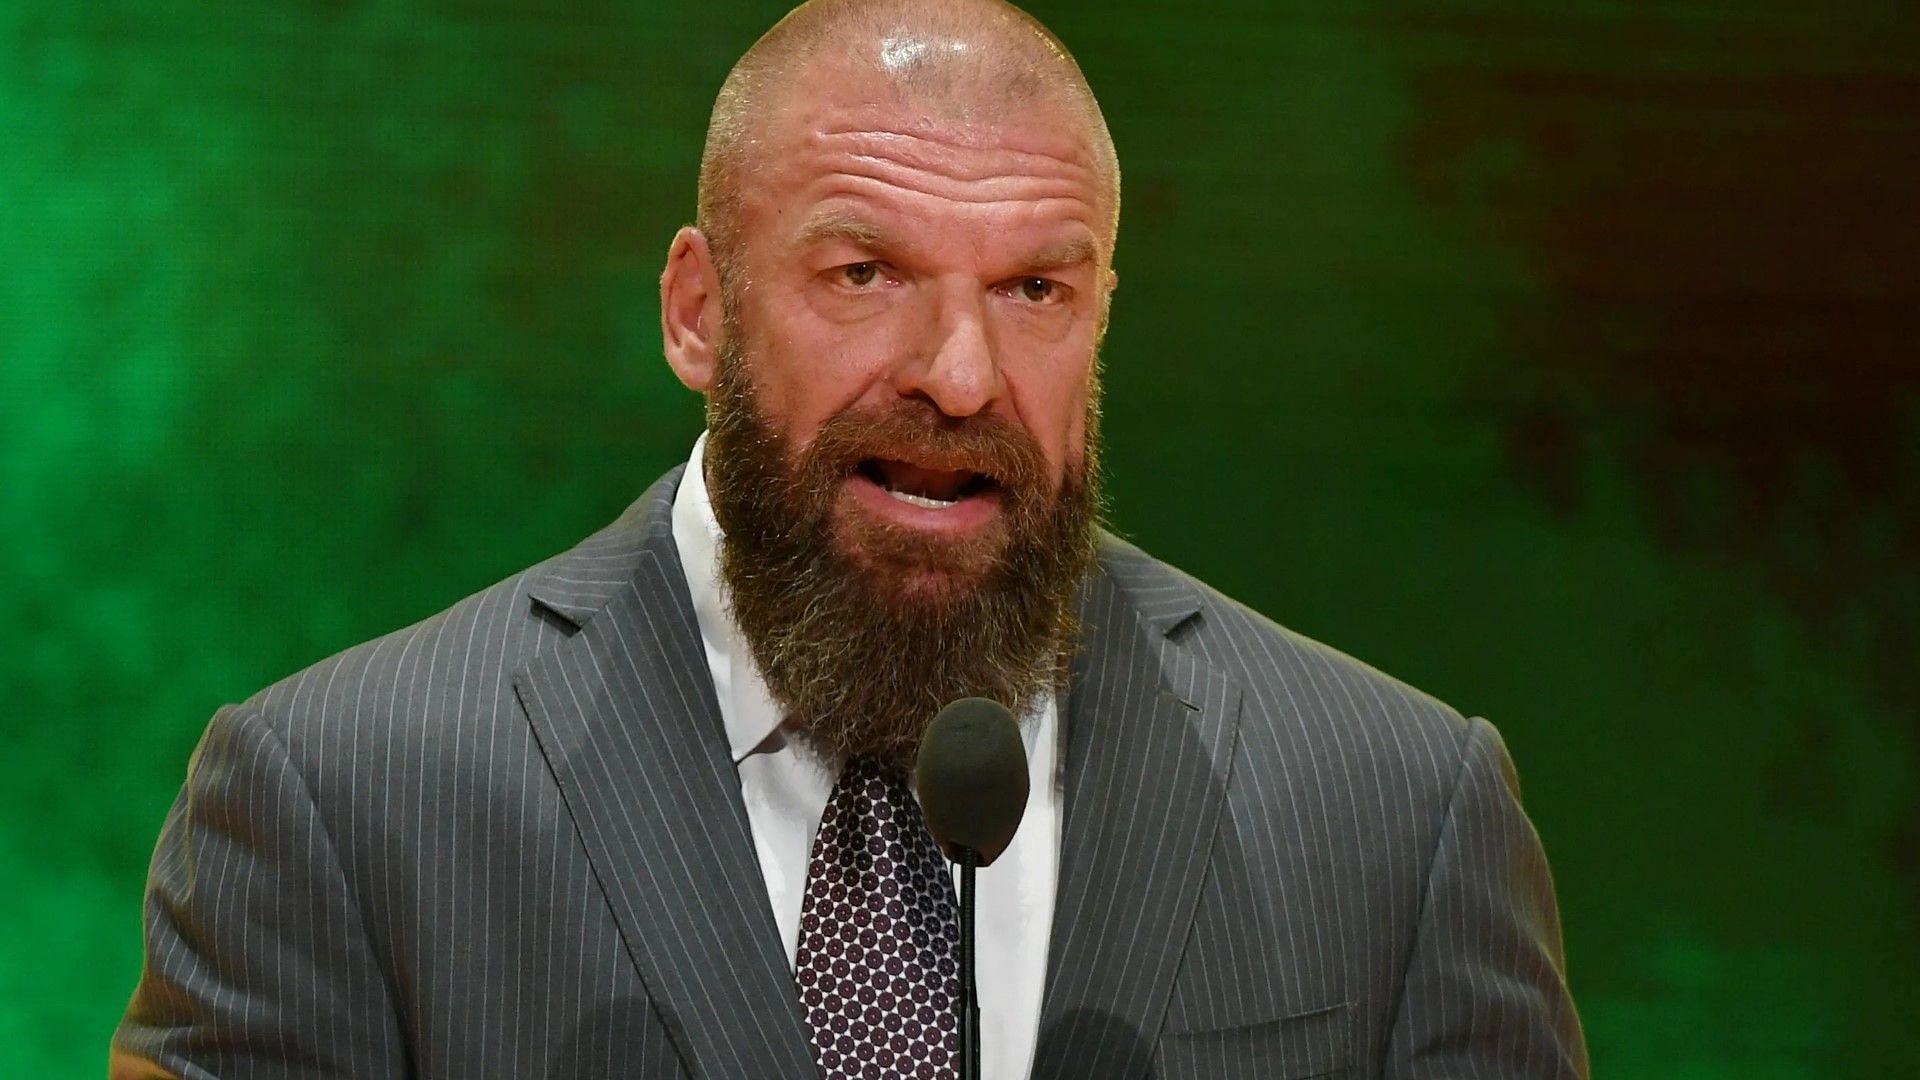 WWE Chief Content Officer Triple H speaks to fans and media